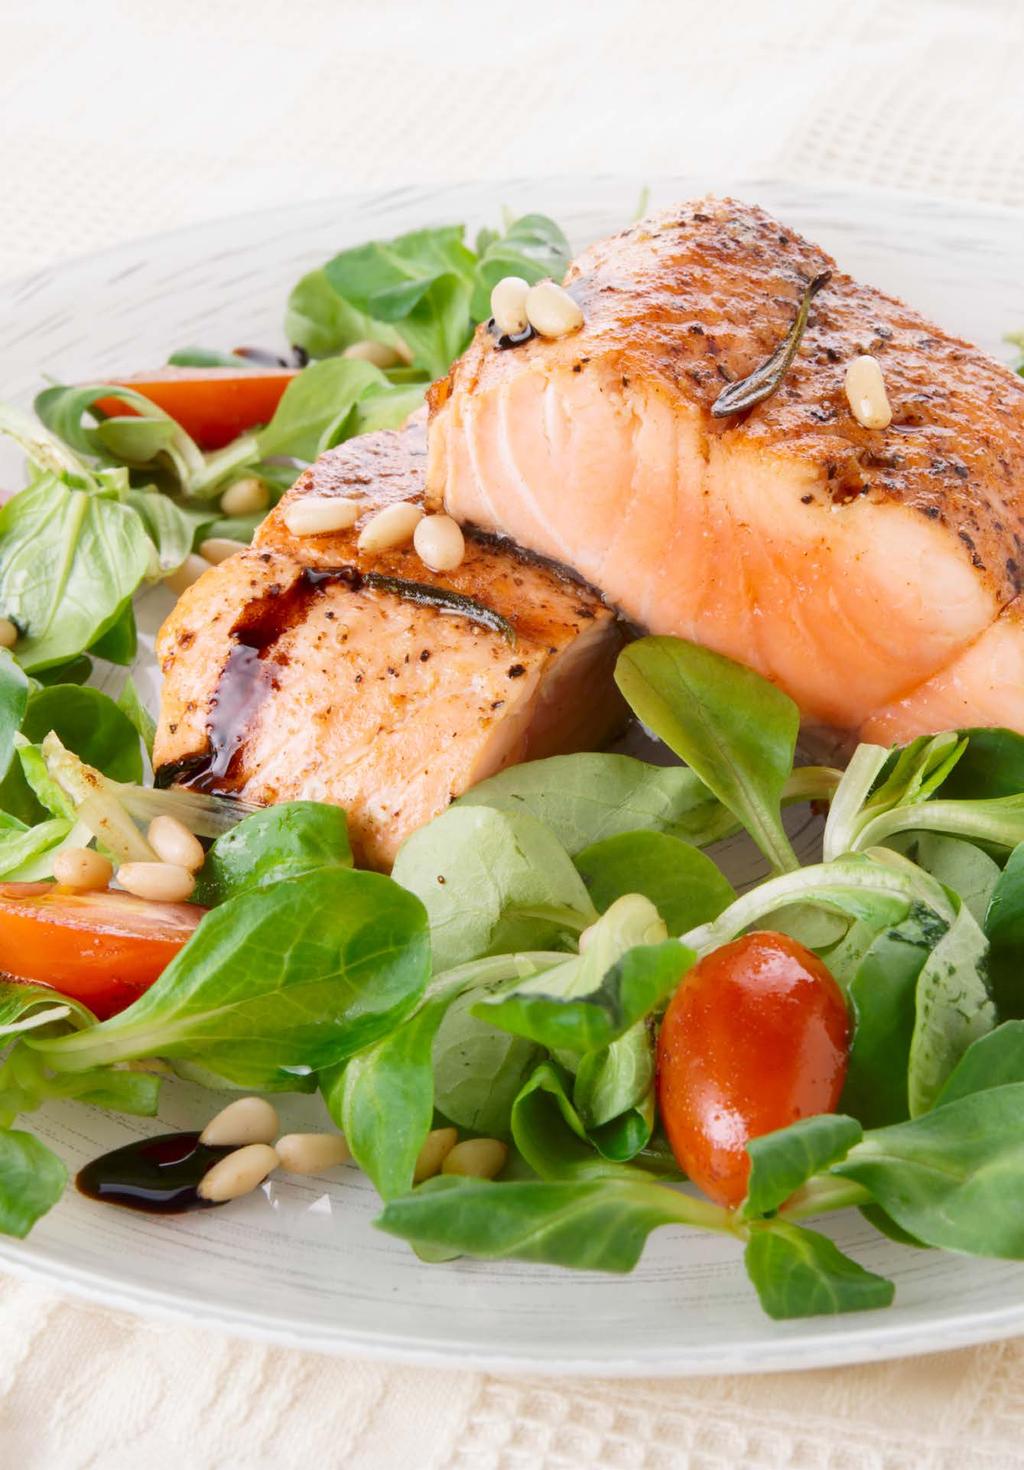 Simple Microwave Salmon With Salad 2 salmon fillets 1 tablespoon of olive oil 2 garlic cloves minced ¼ teaspoon of salt Black pepper Mixed greens 1. Place salmon on microwave dish, skin down. 2. Brush fillets with olive oil and spread the garlic 3.